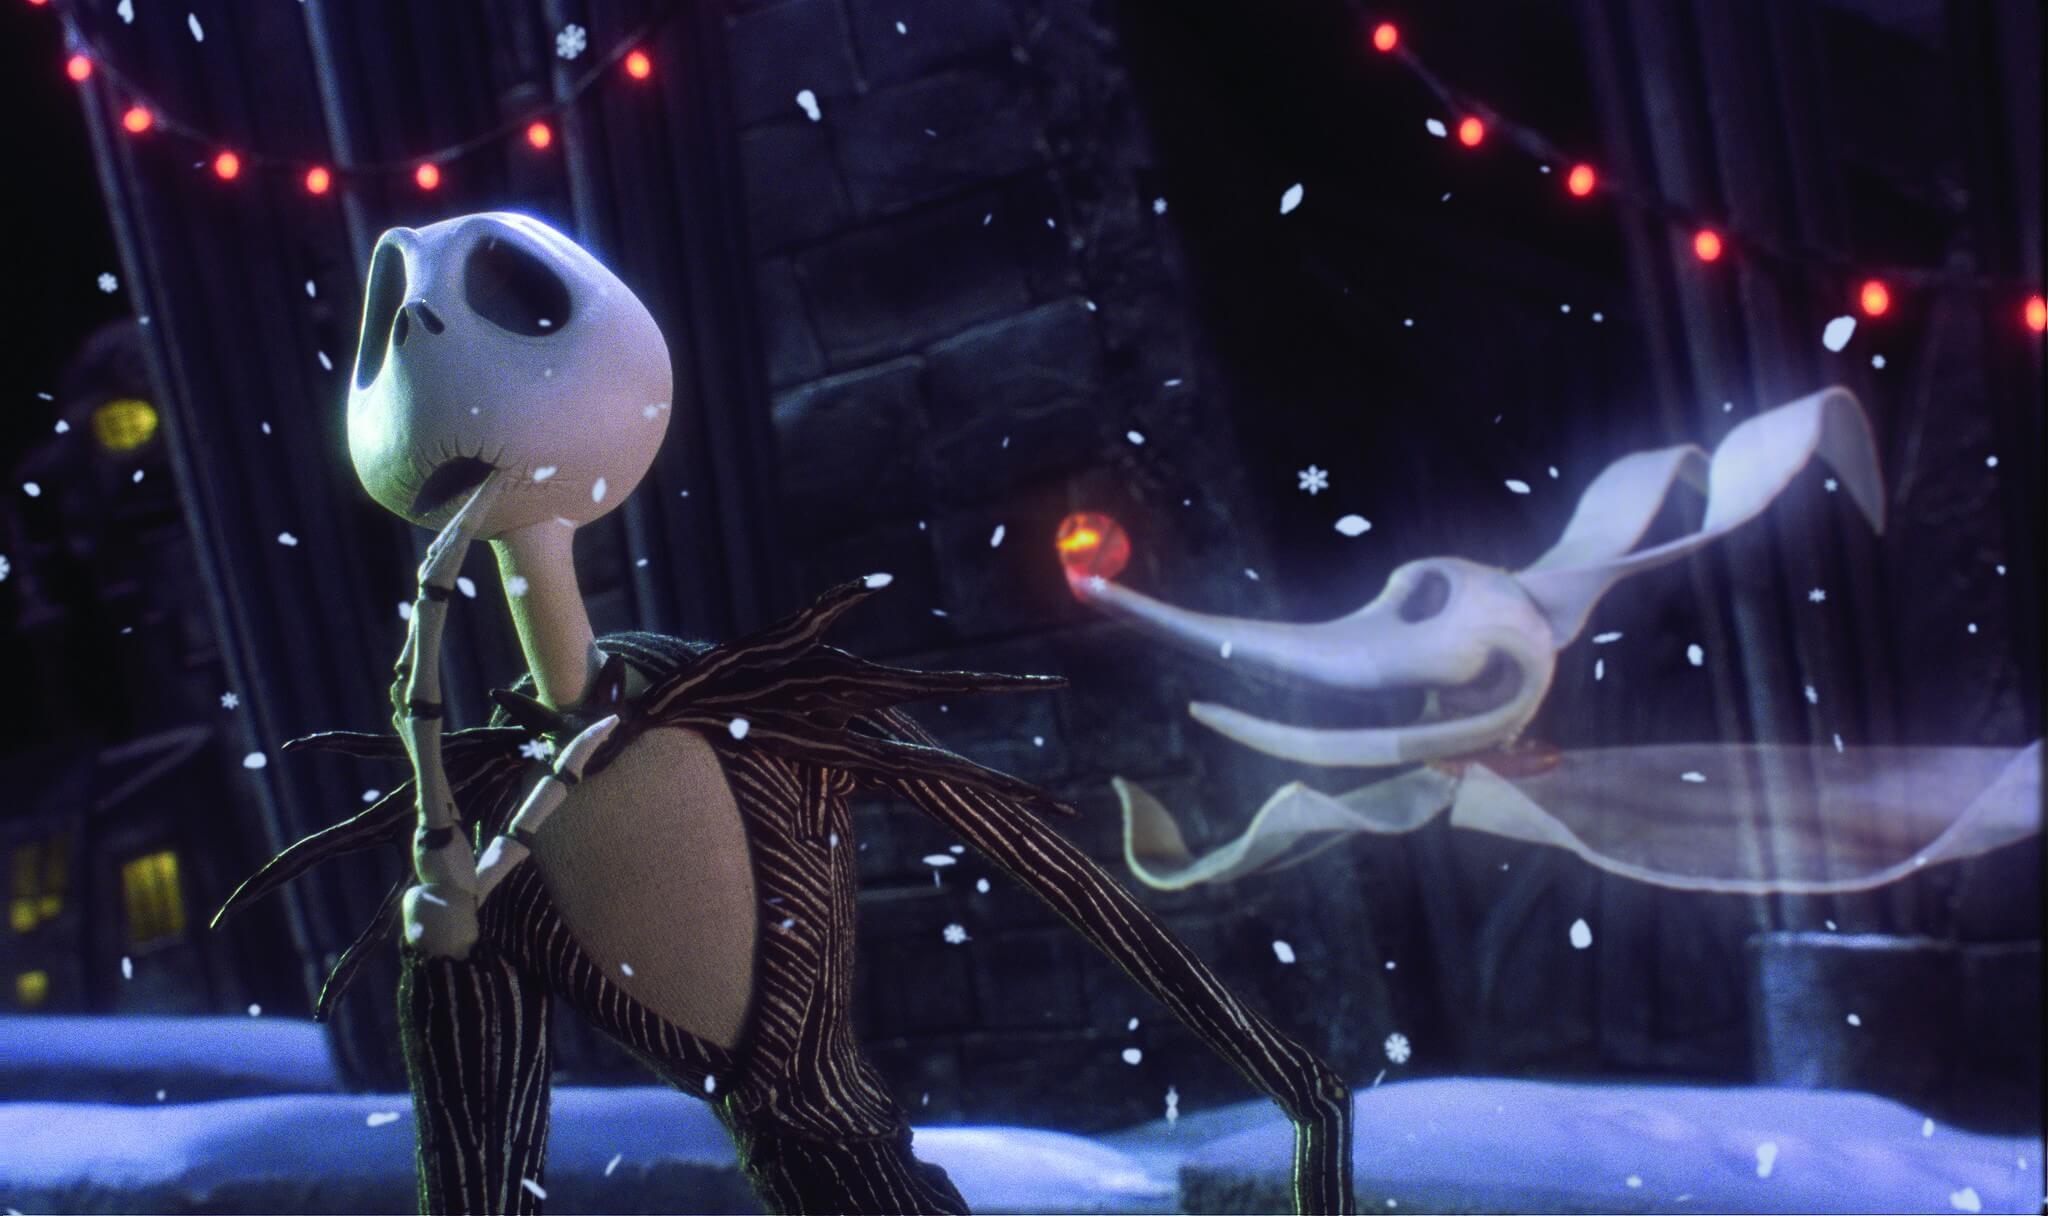 ‘Nightmare Before Christmas’ Follow-Up Reportedly Being Talked About At Disney